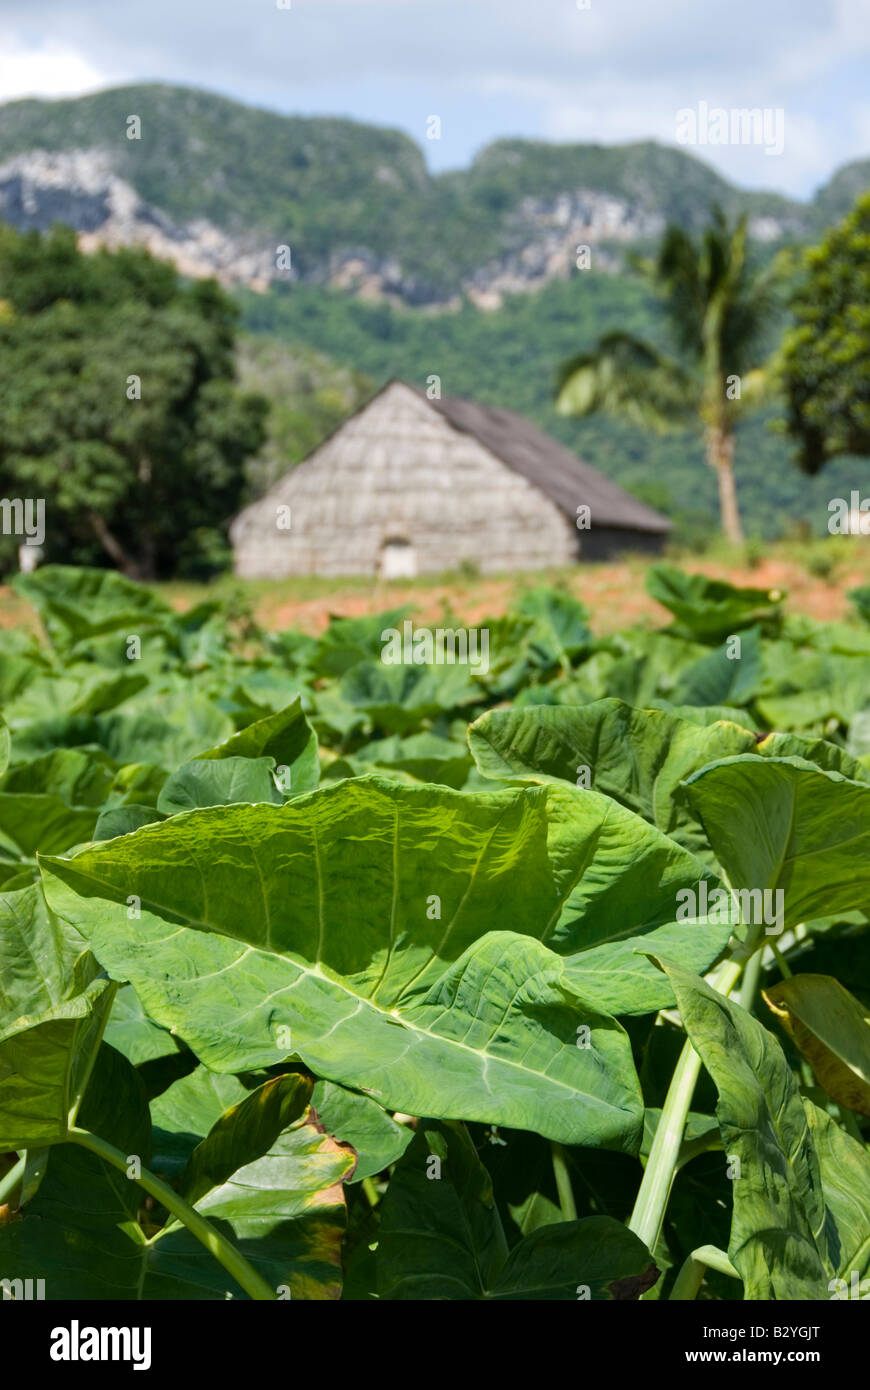 Tobacco plantation with hut for hanging and drying leaves in tobacco producing region of Viñales Cuba Stock Photo